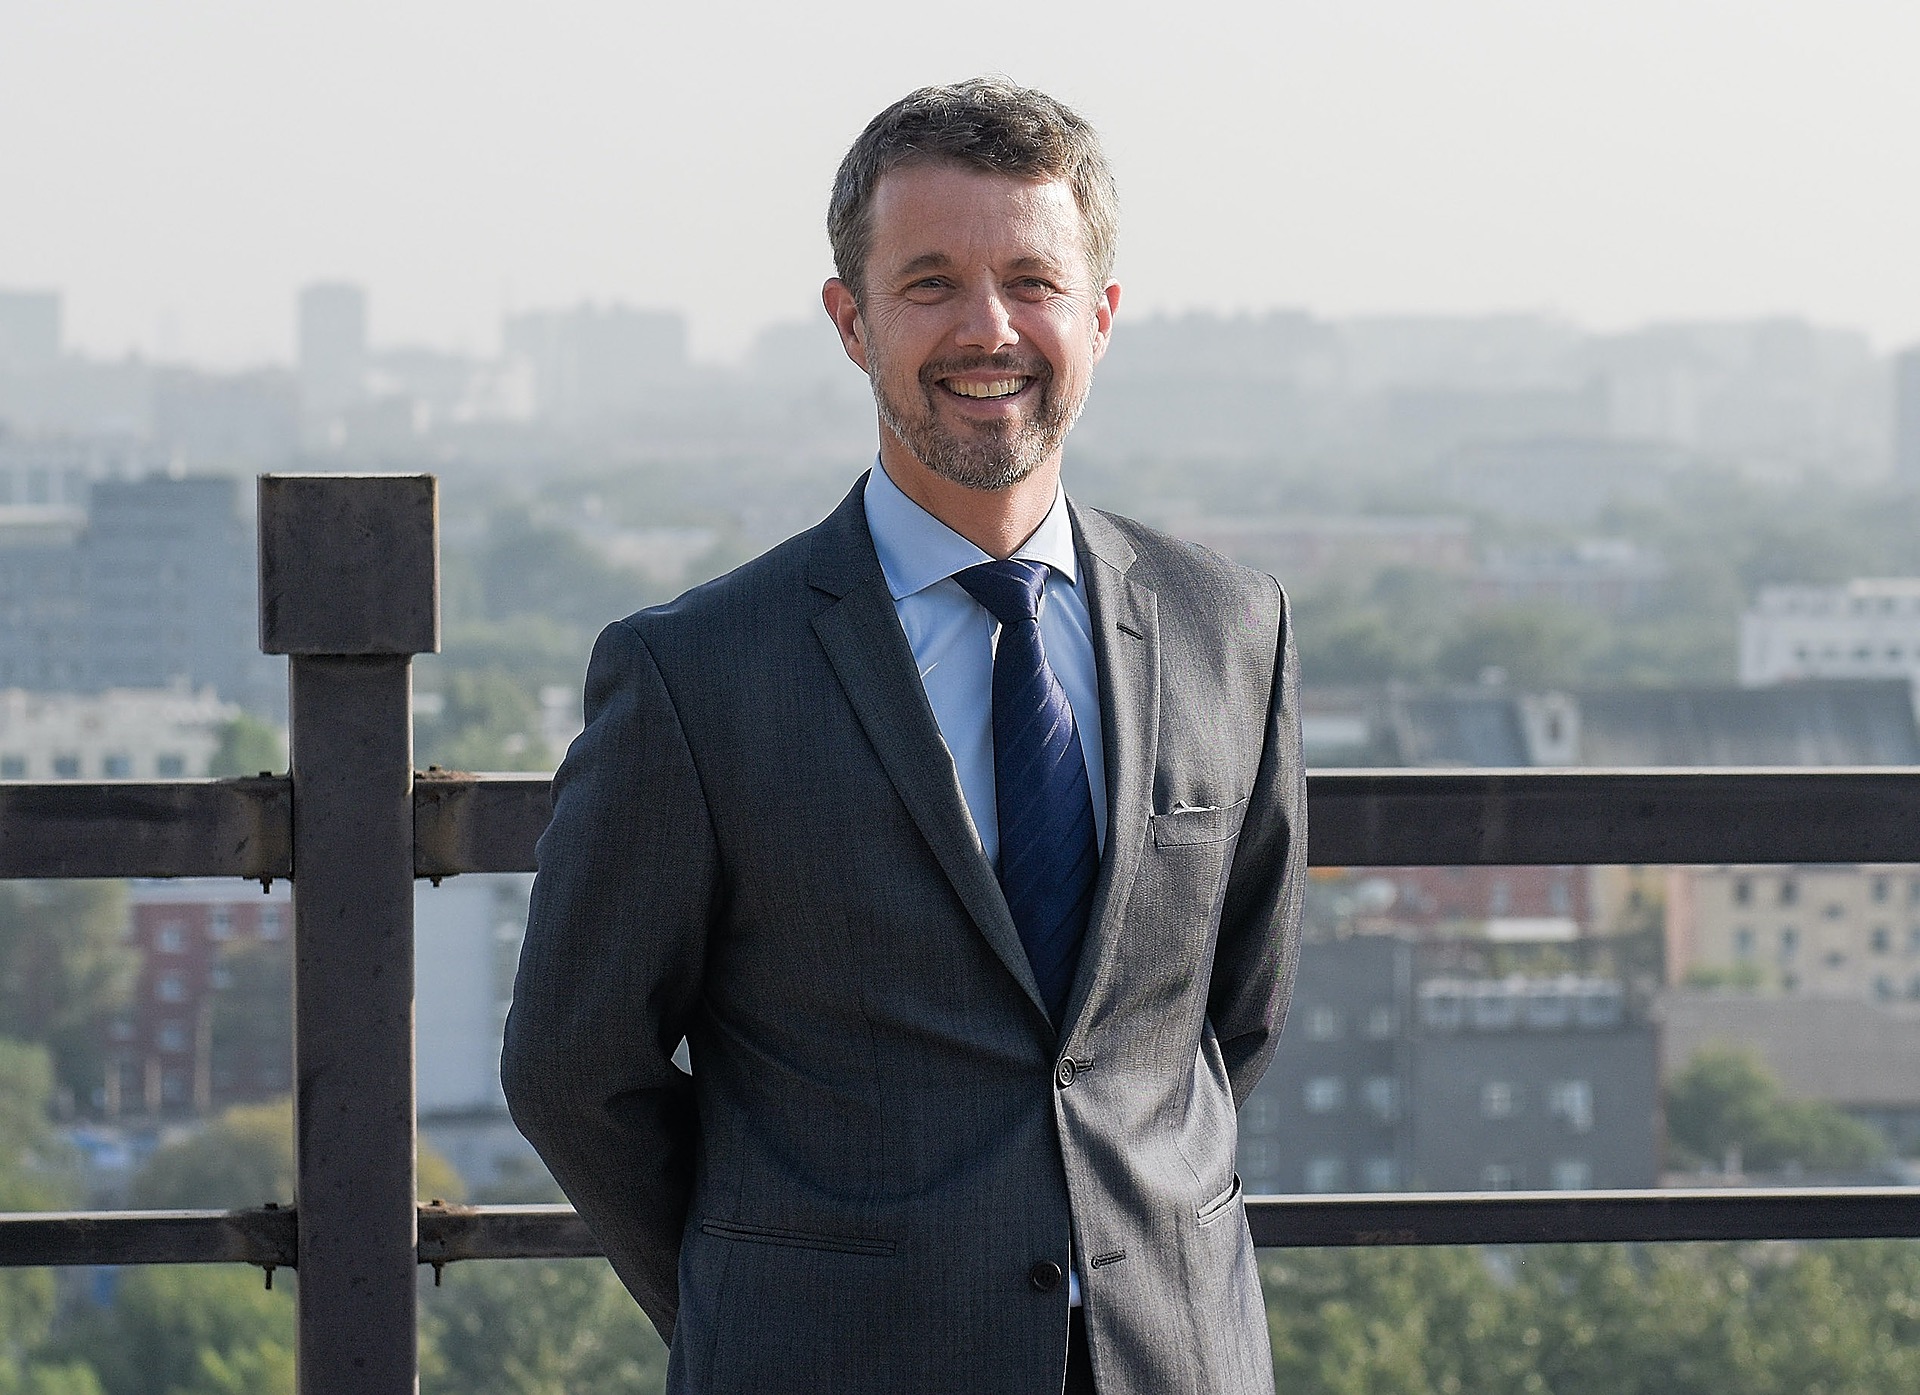   Wishing His Royal Highness Crown Prince Frederik of Denmark a happy 53rd birthday  